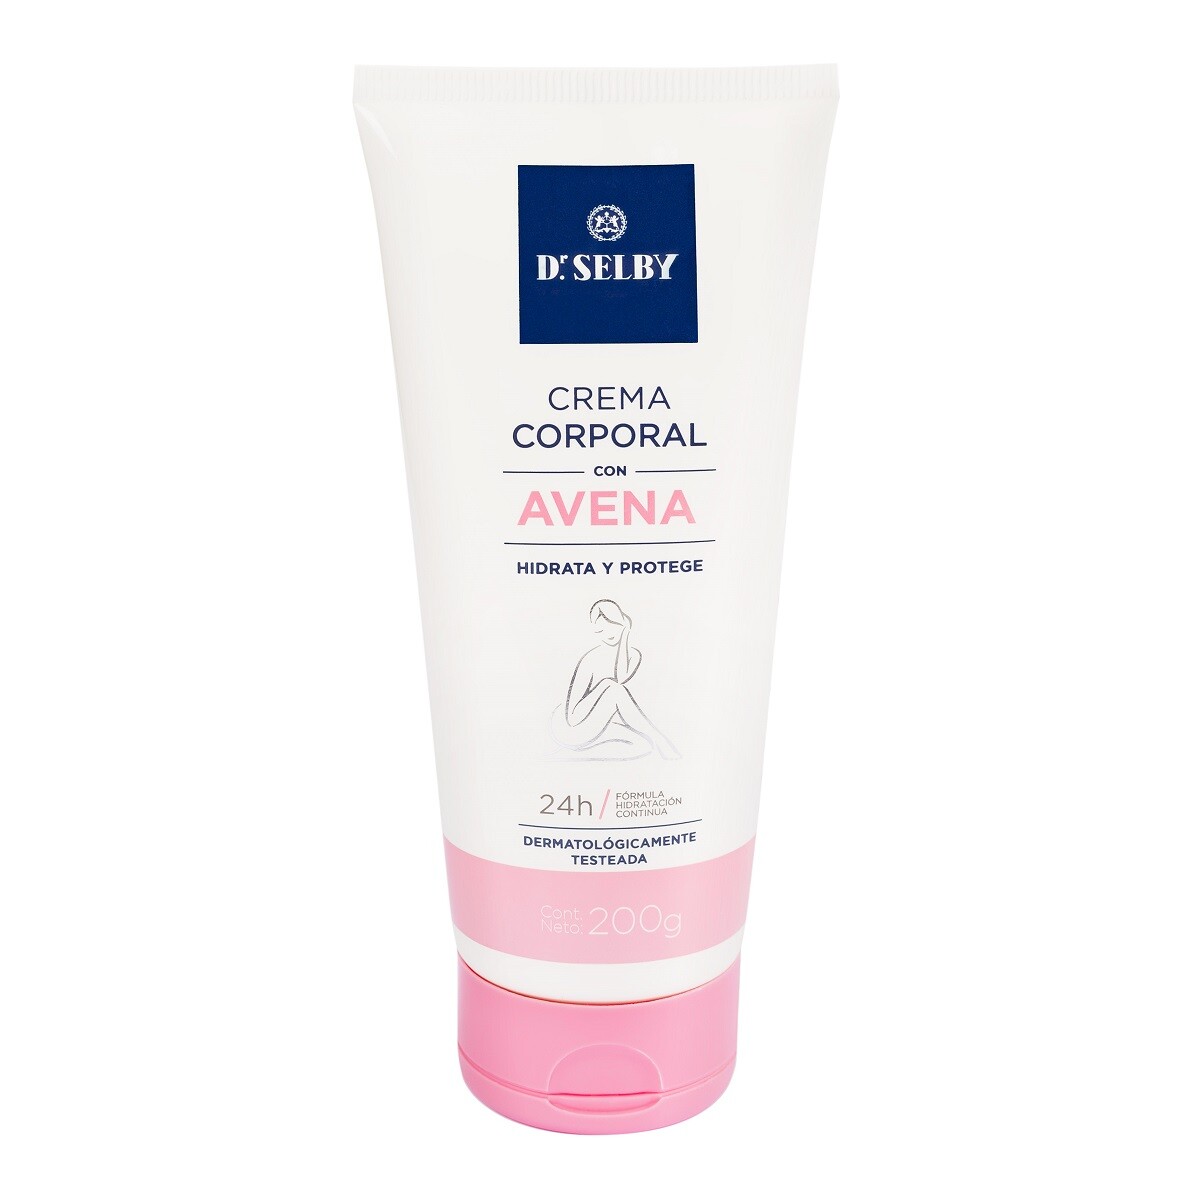 Crema Corporal Dr Selby Avena 200 Grs. 